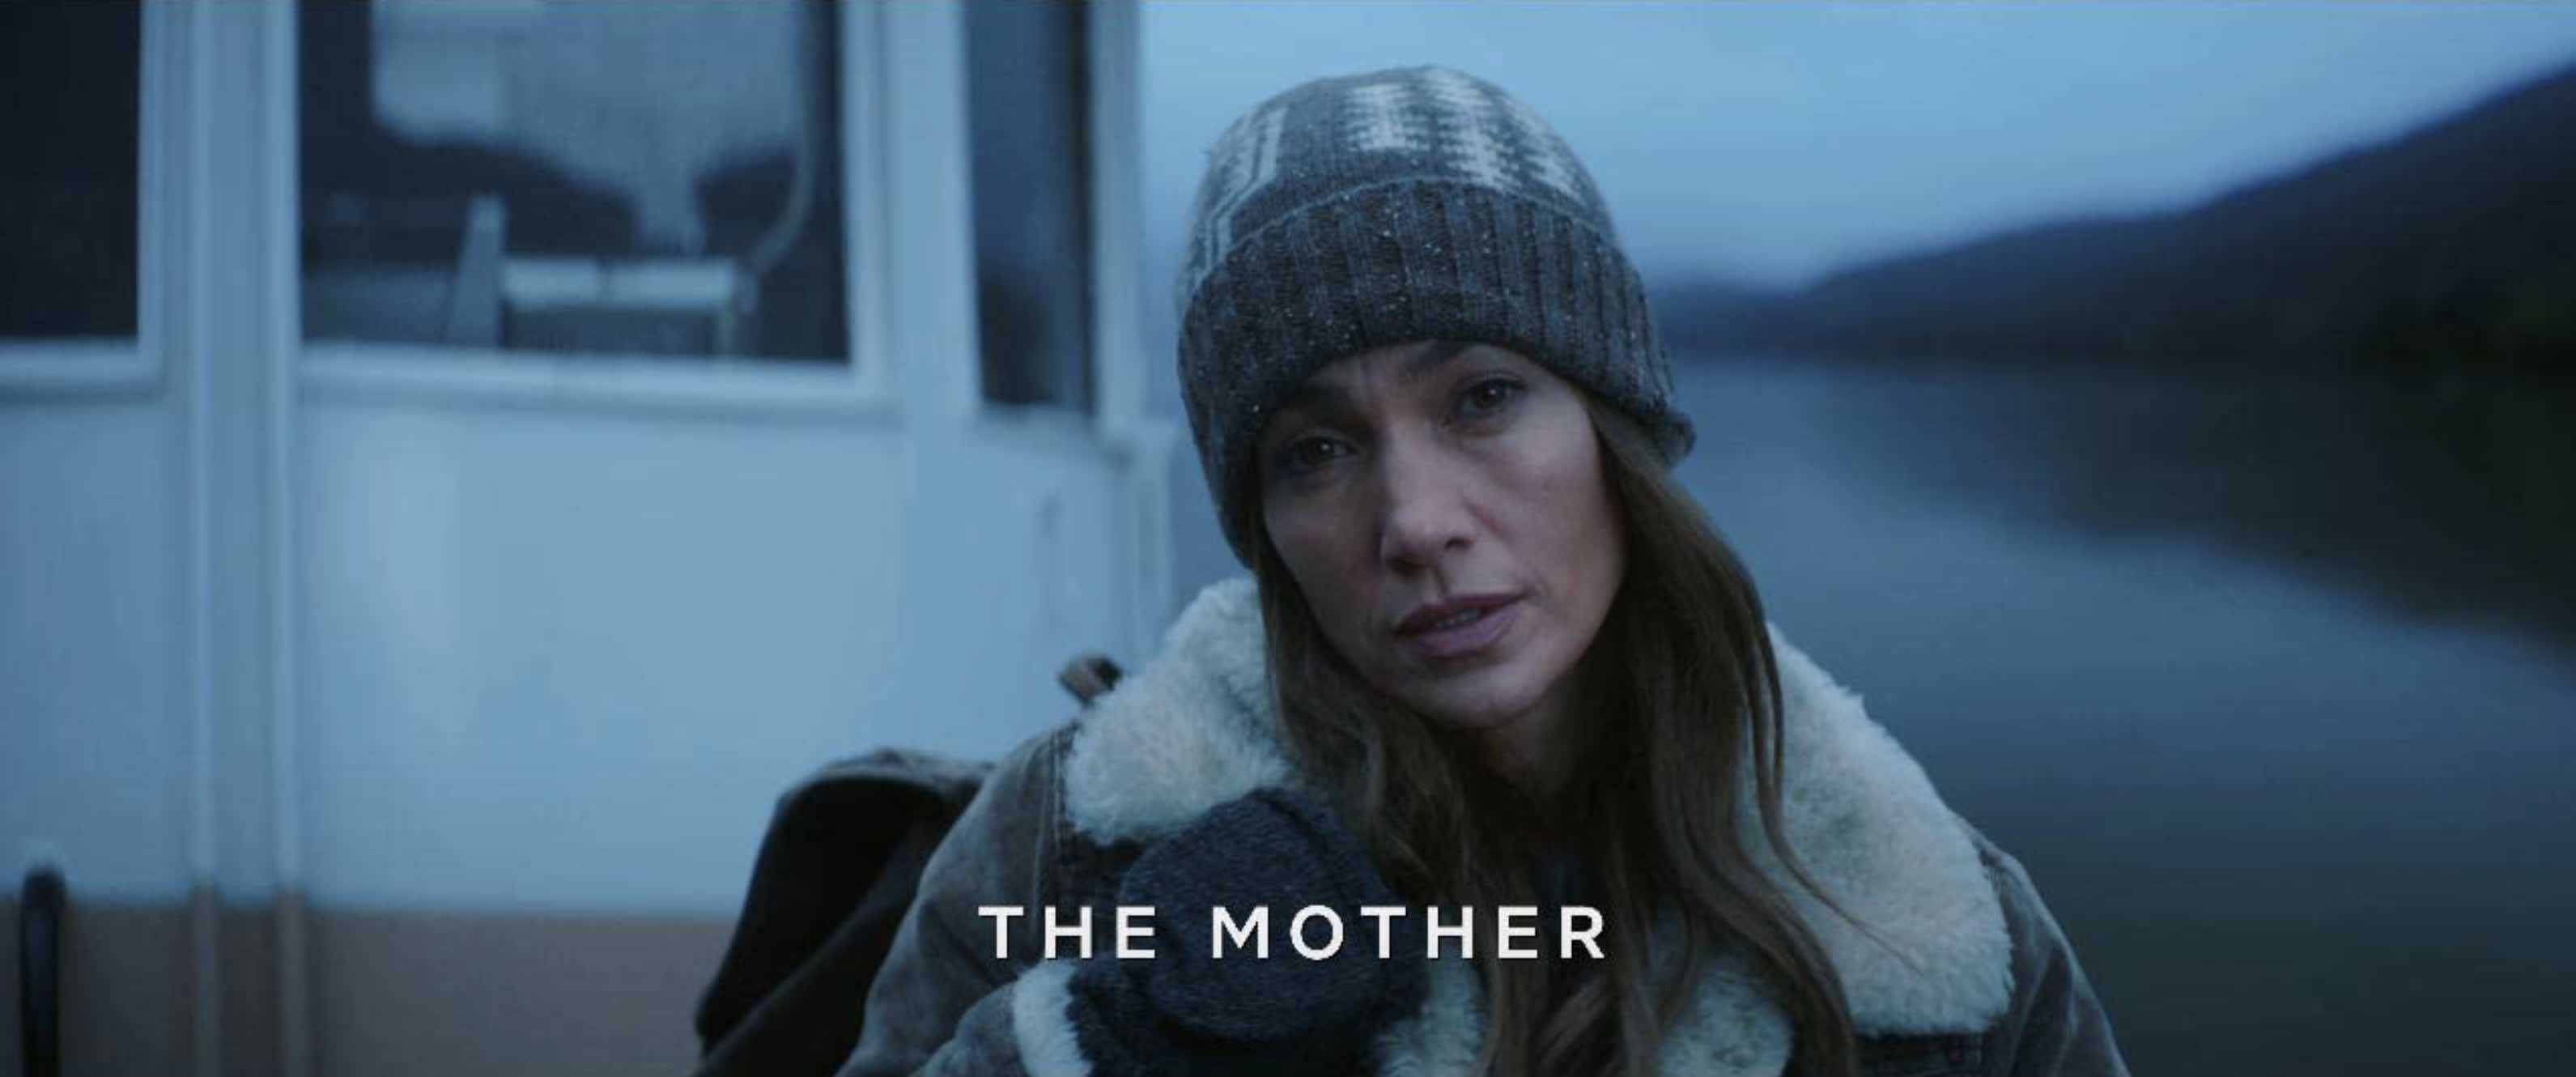 the mother movie reviews rotten tomatoes